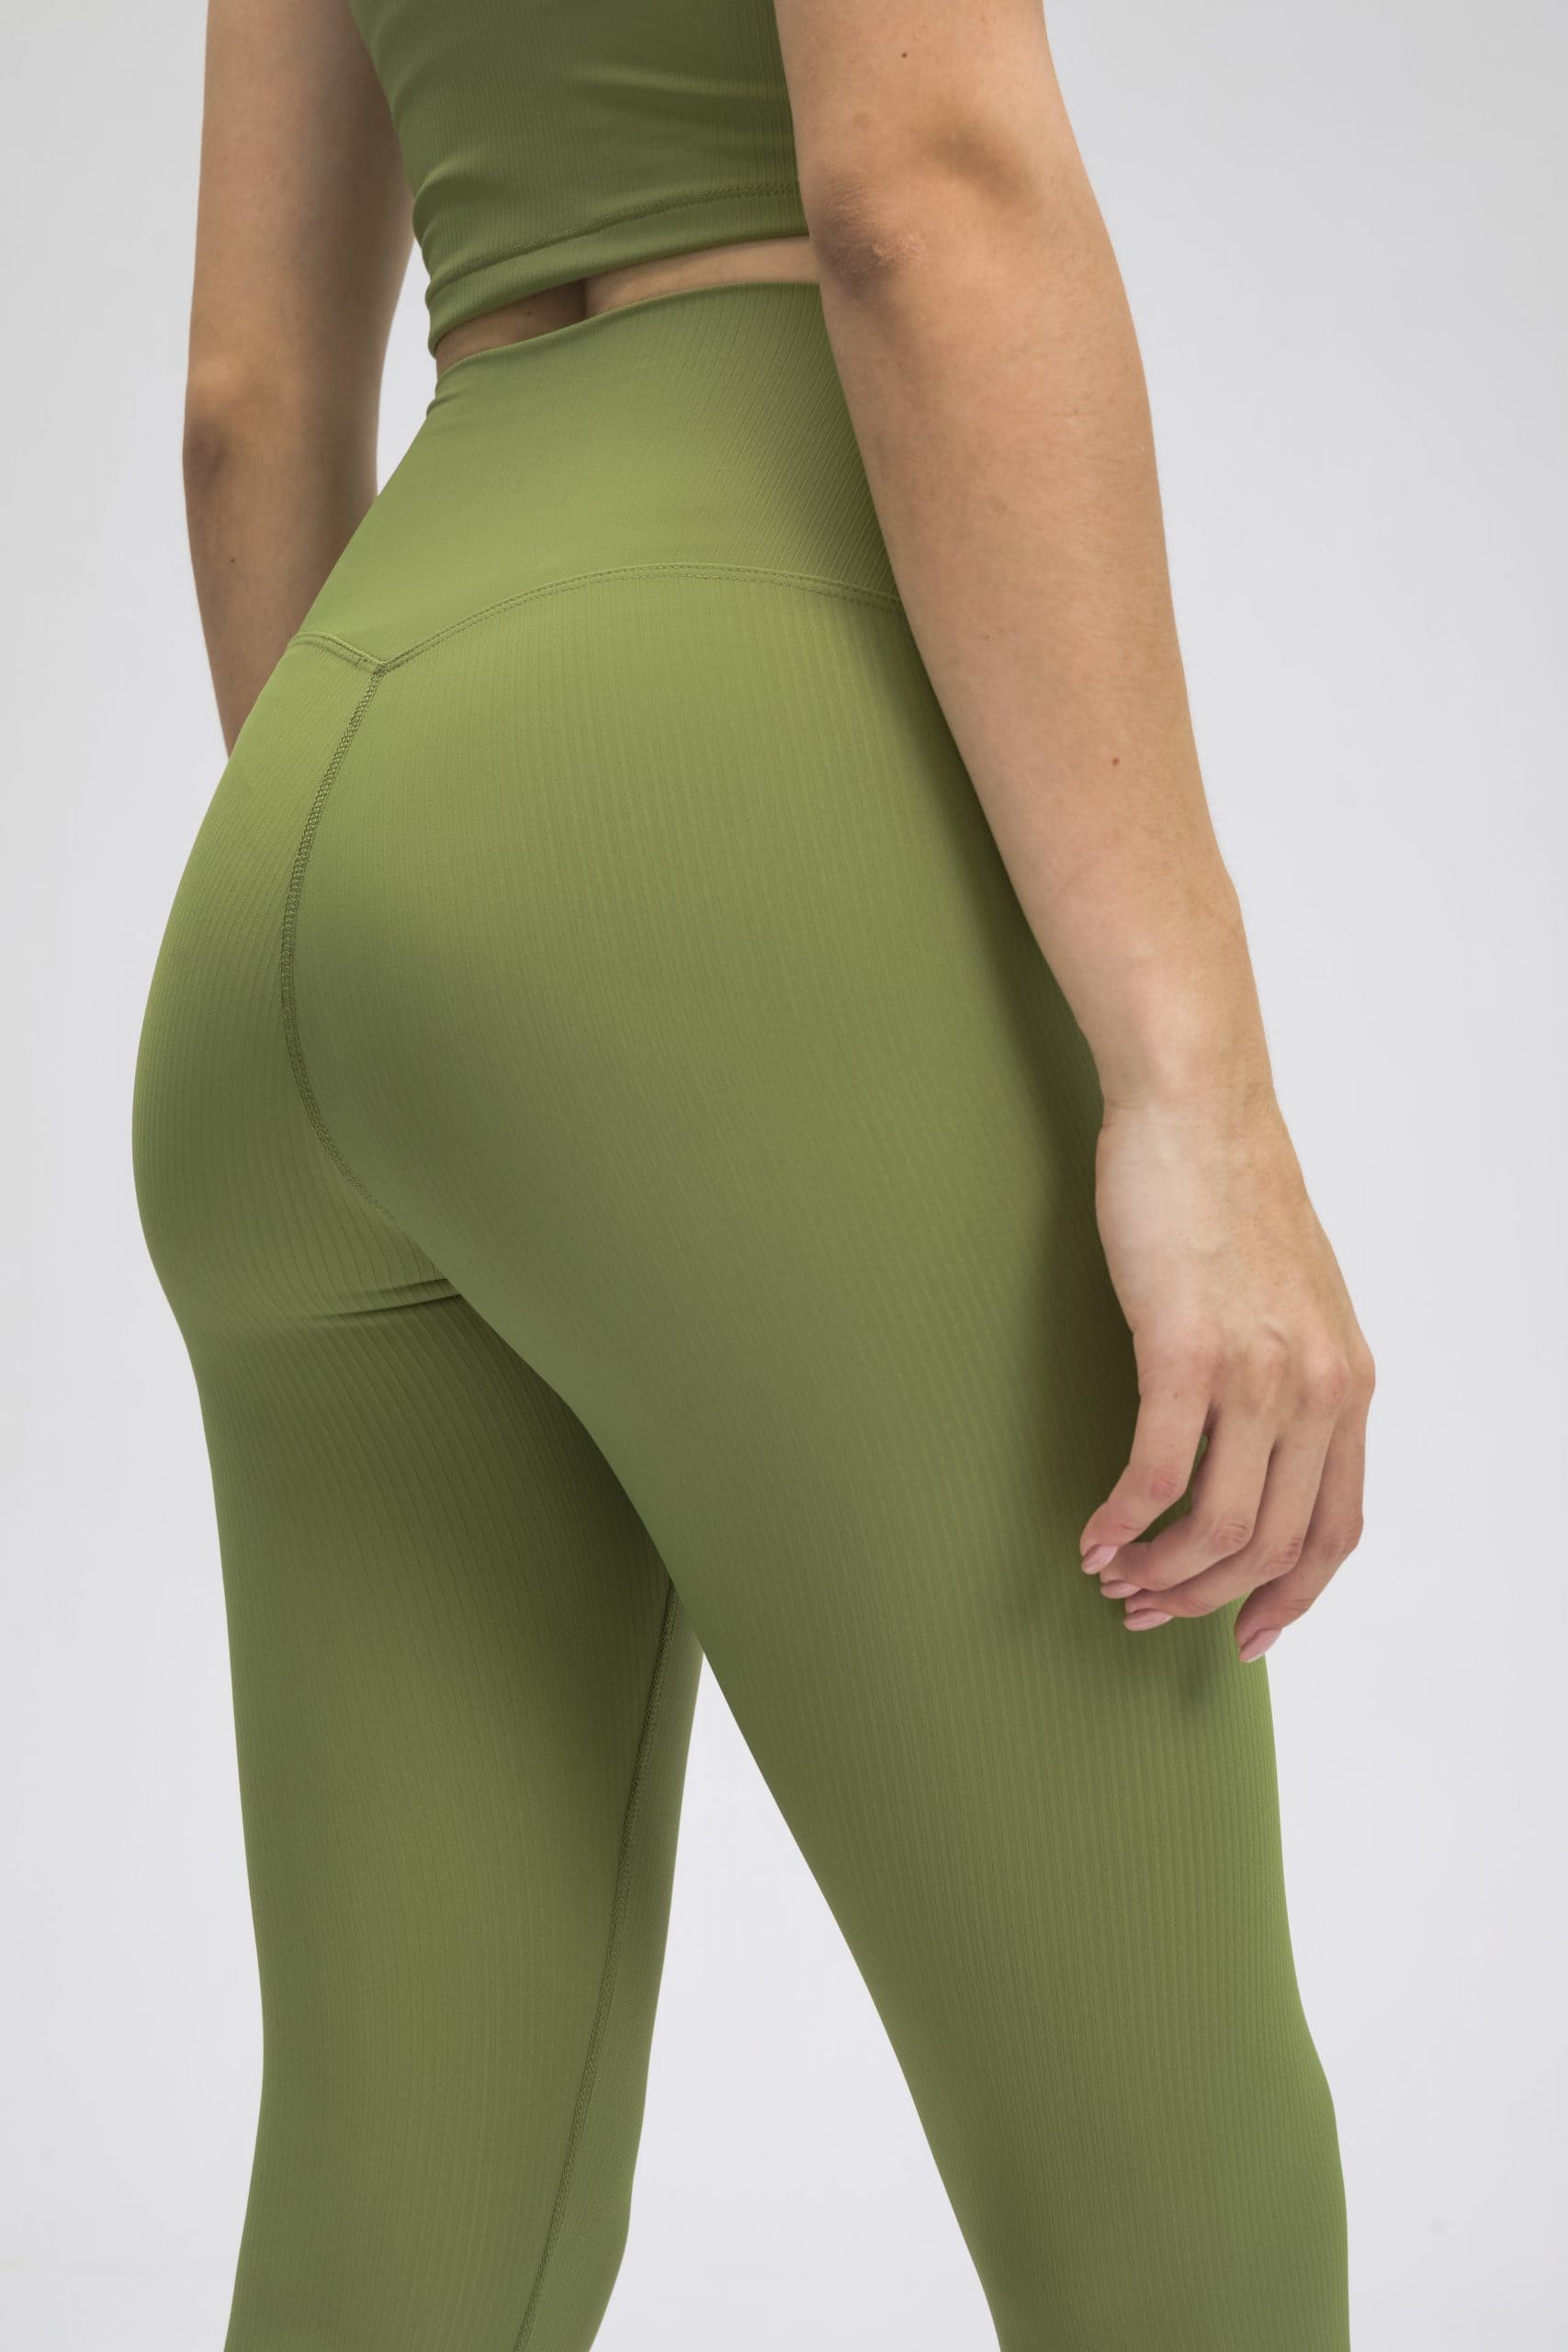 Olive Green Spanx Leggings - China Fitness Clothing